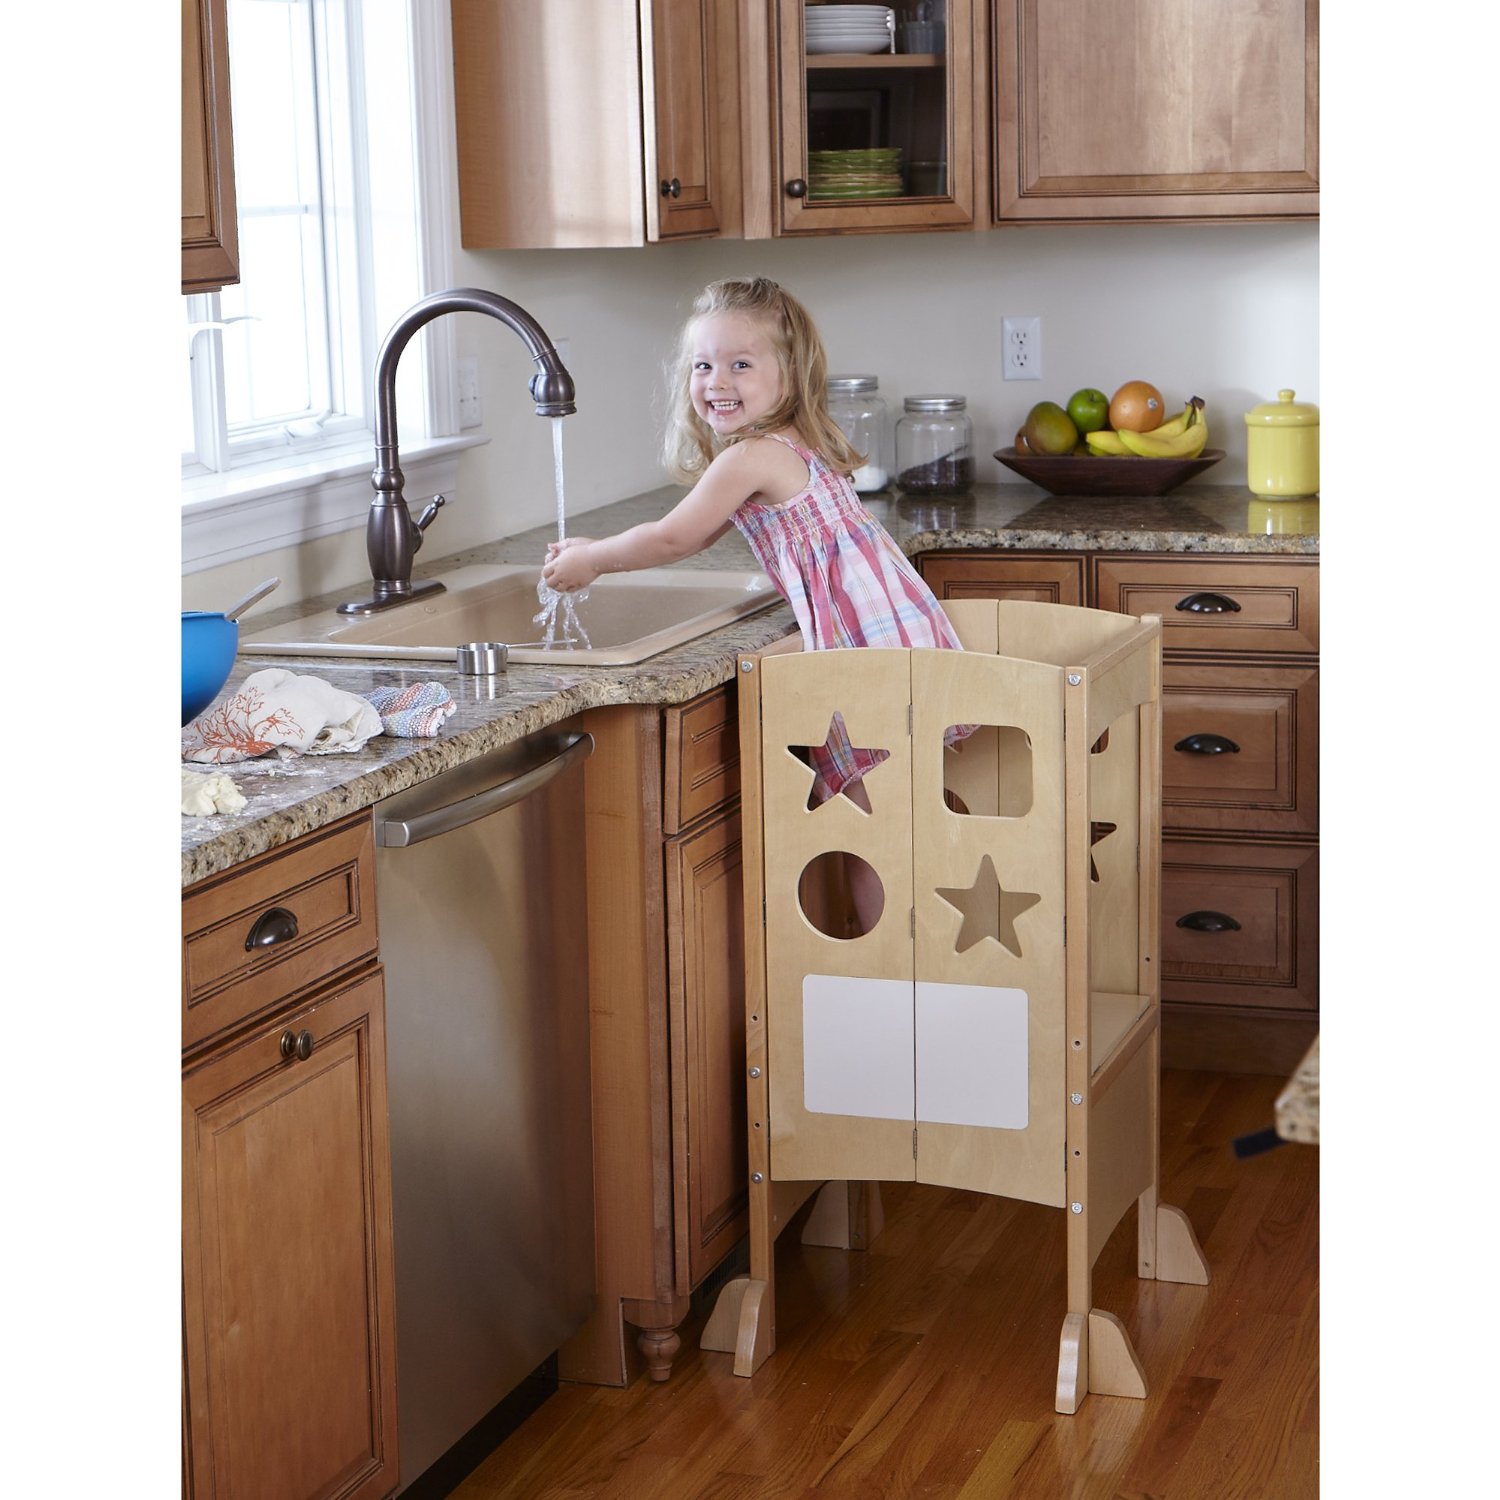 6 Recommended Safety Toddler Kitchen Helper for Supporting Your Courage